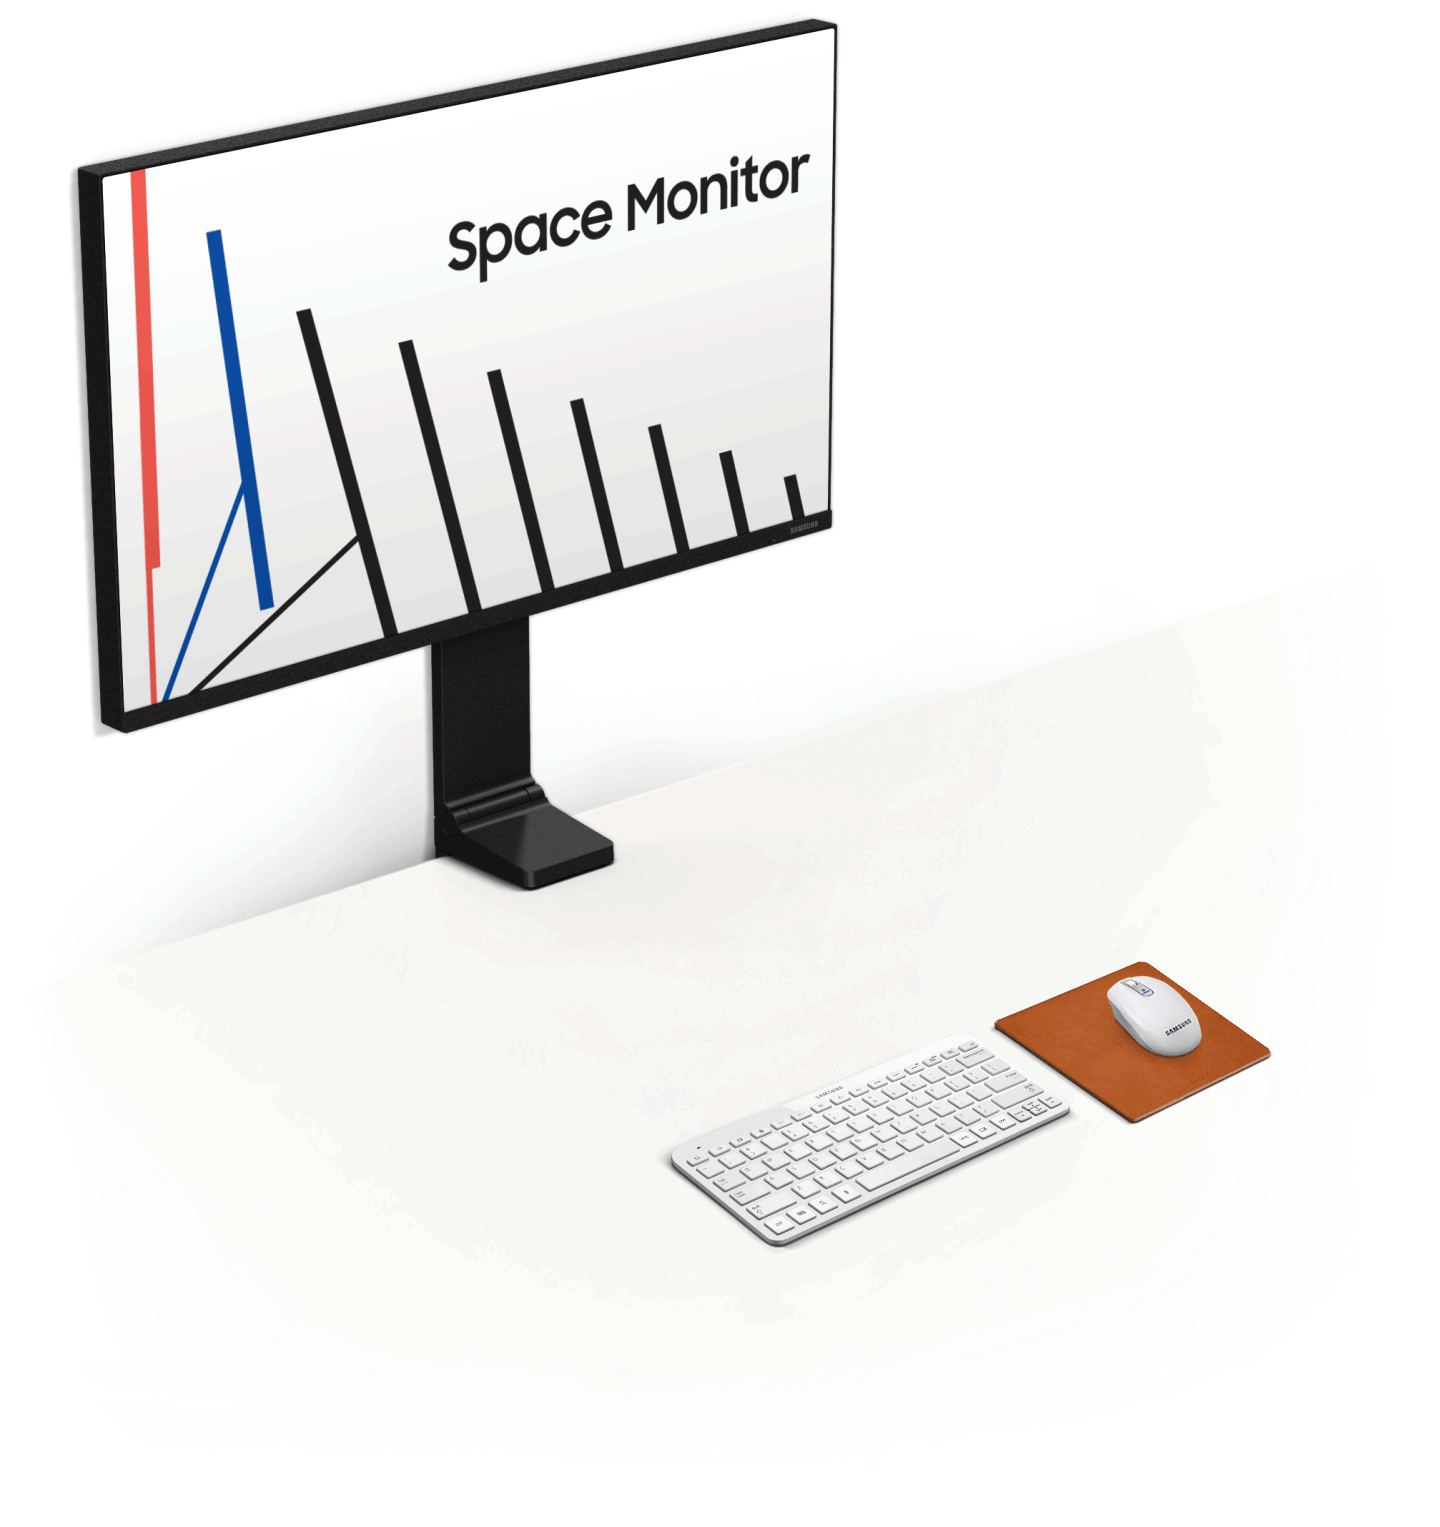 Space Monitor REVIEW: Fed Up Of Cluttered Desks? Try The Samsung Space Monitor, Its Unique